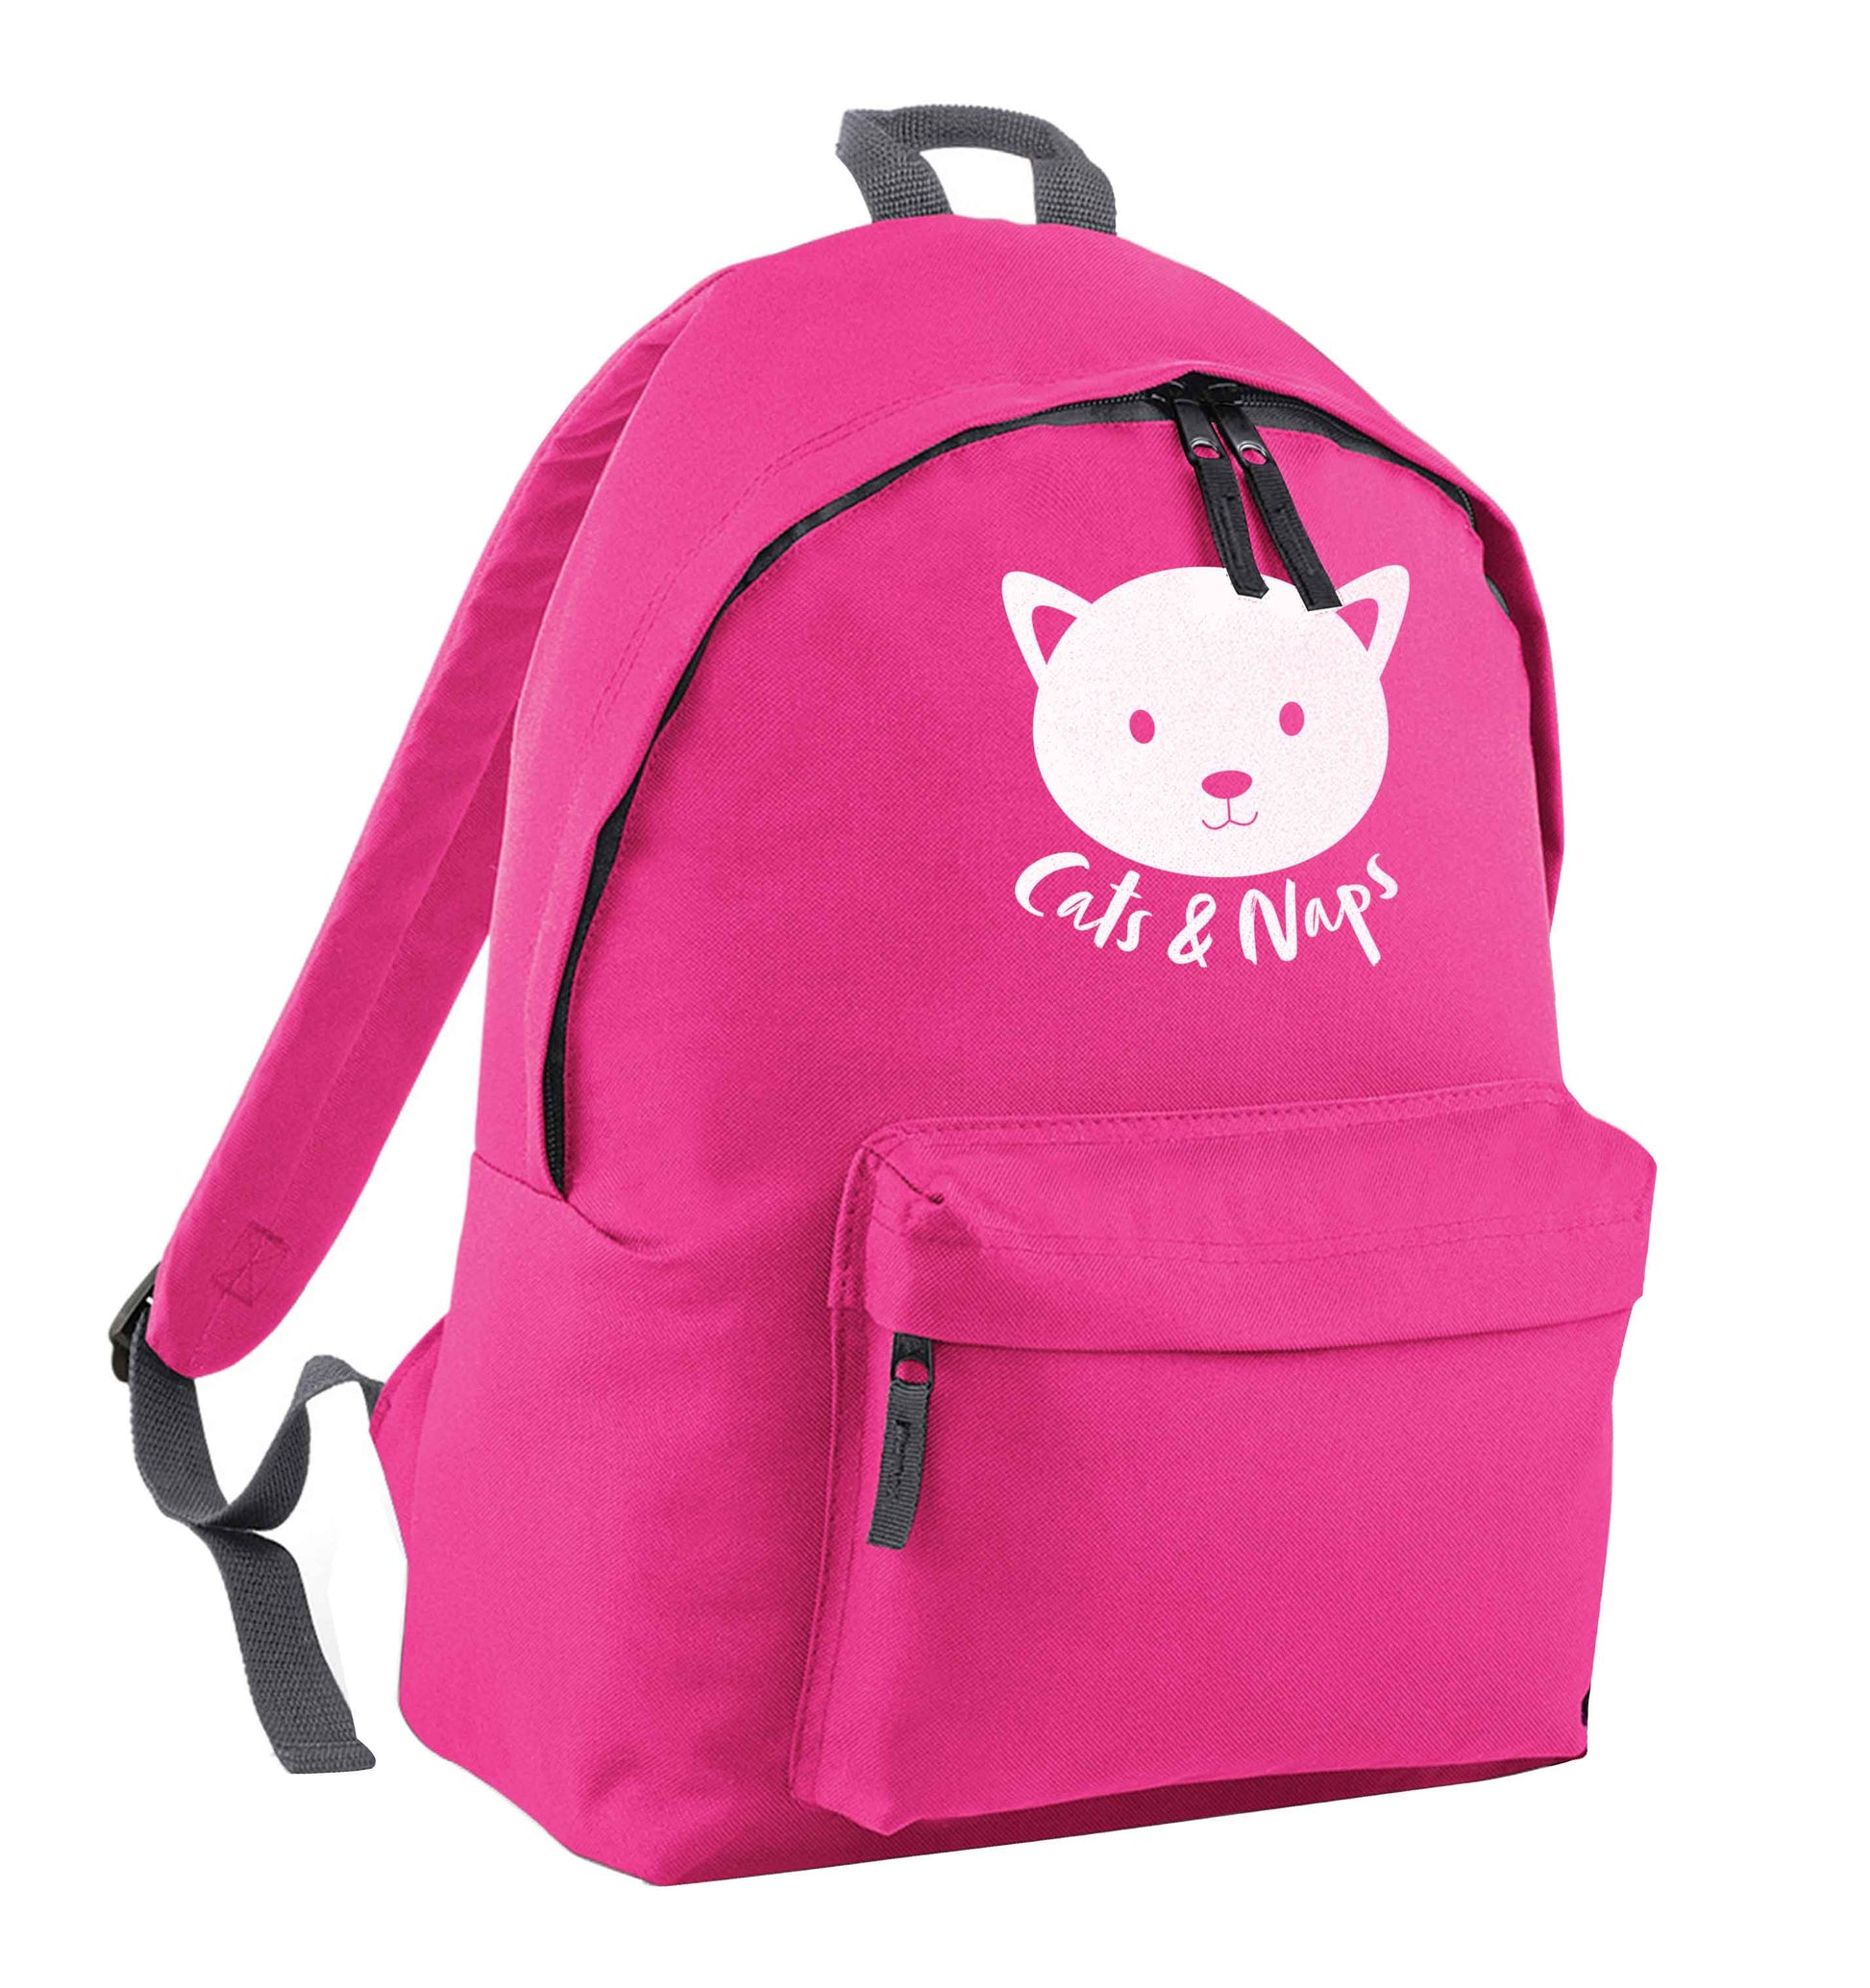 Cats and naps Kit pink children's backpack